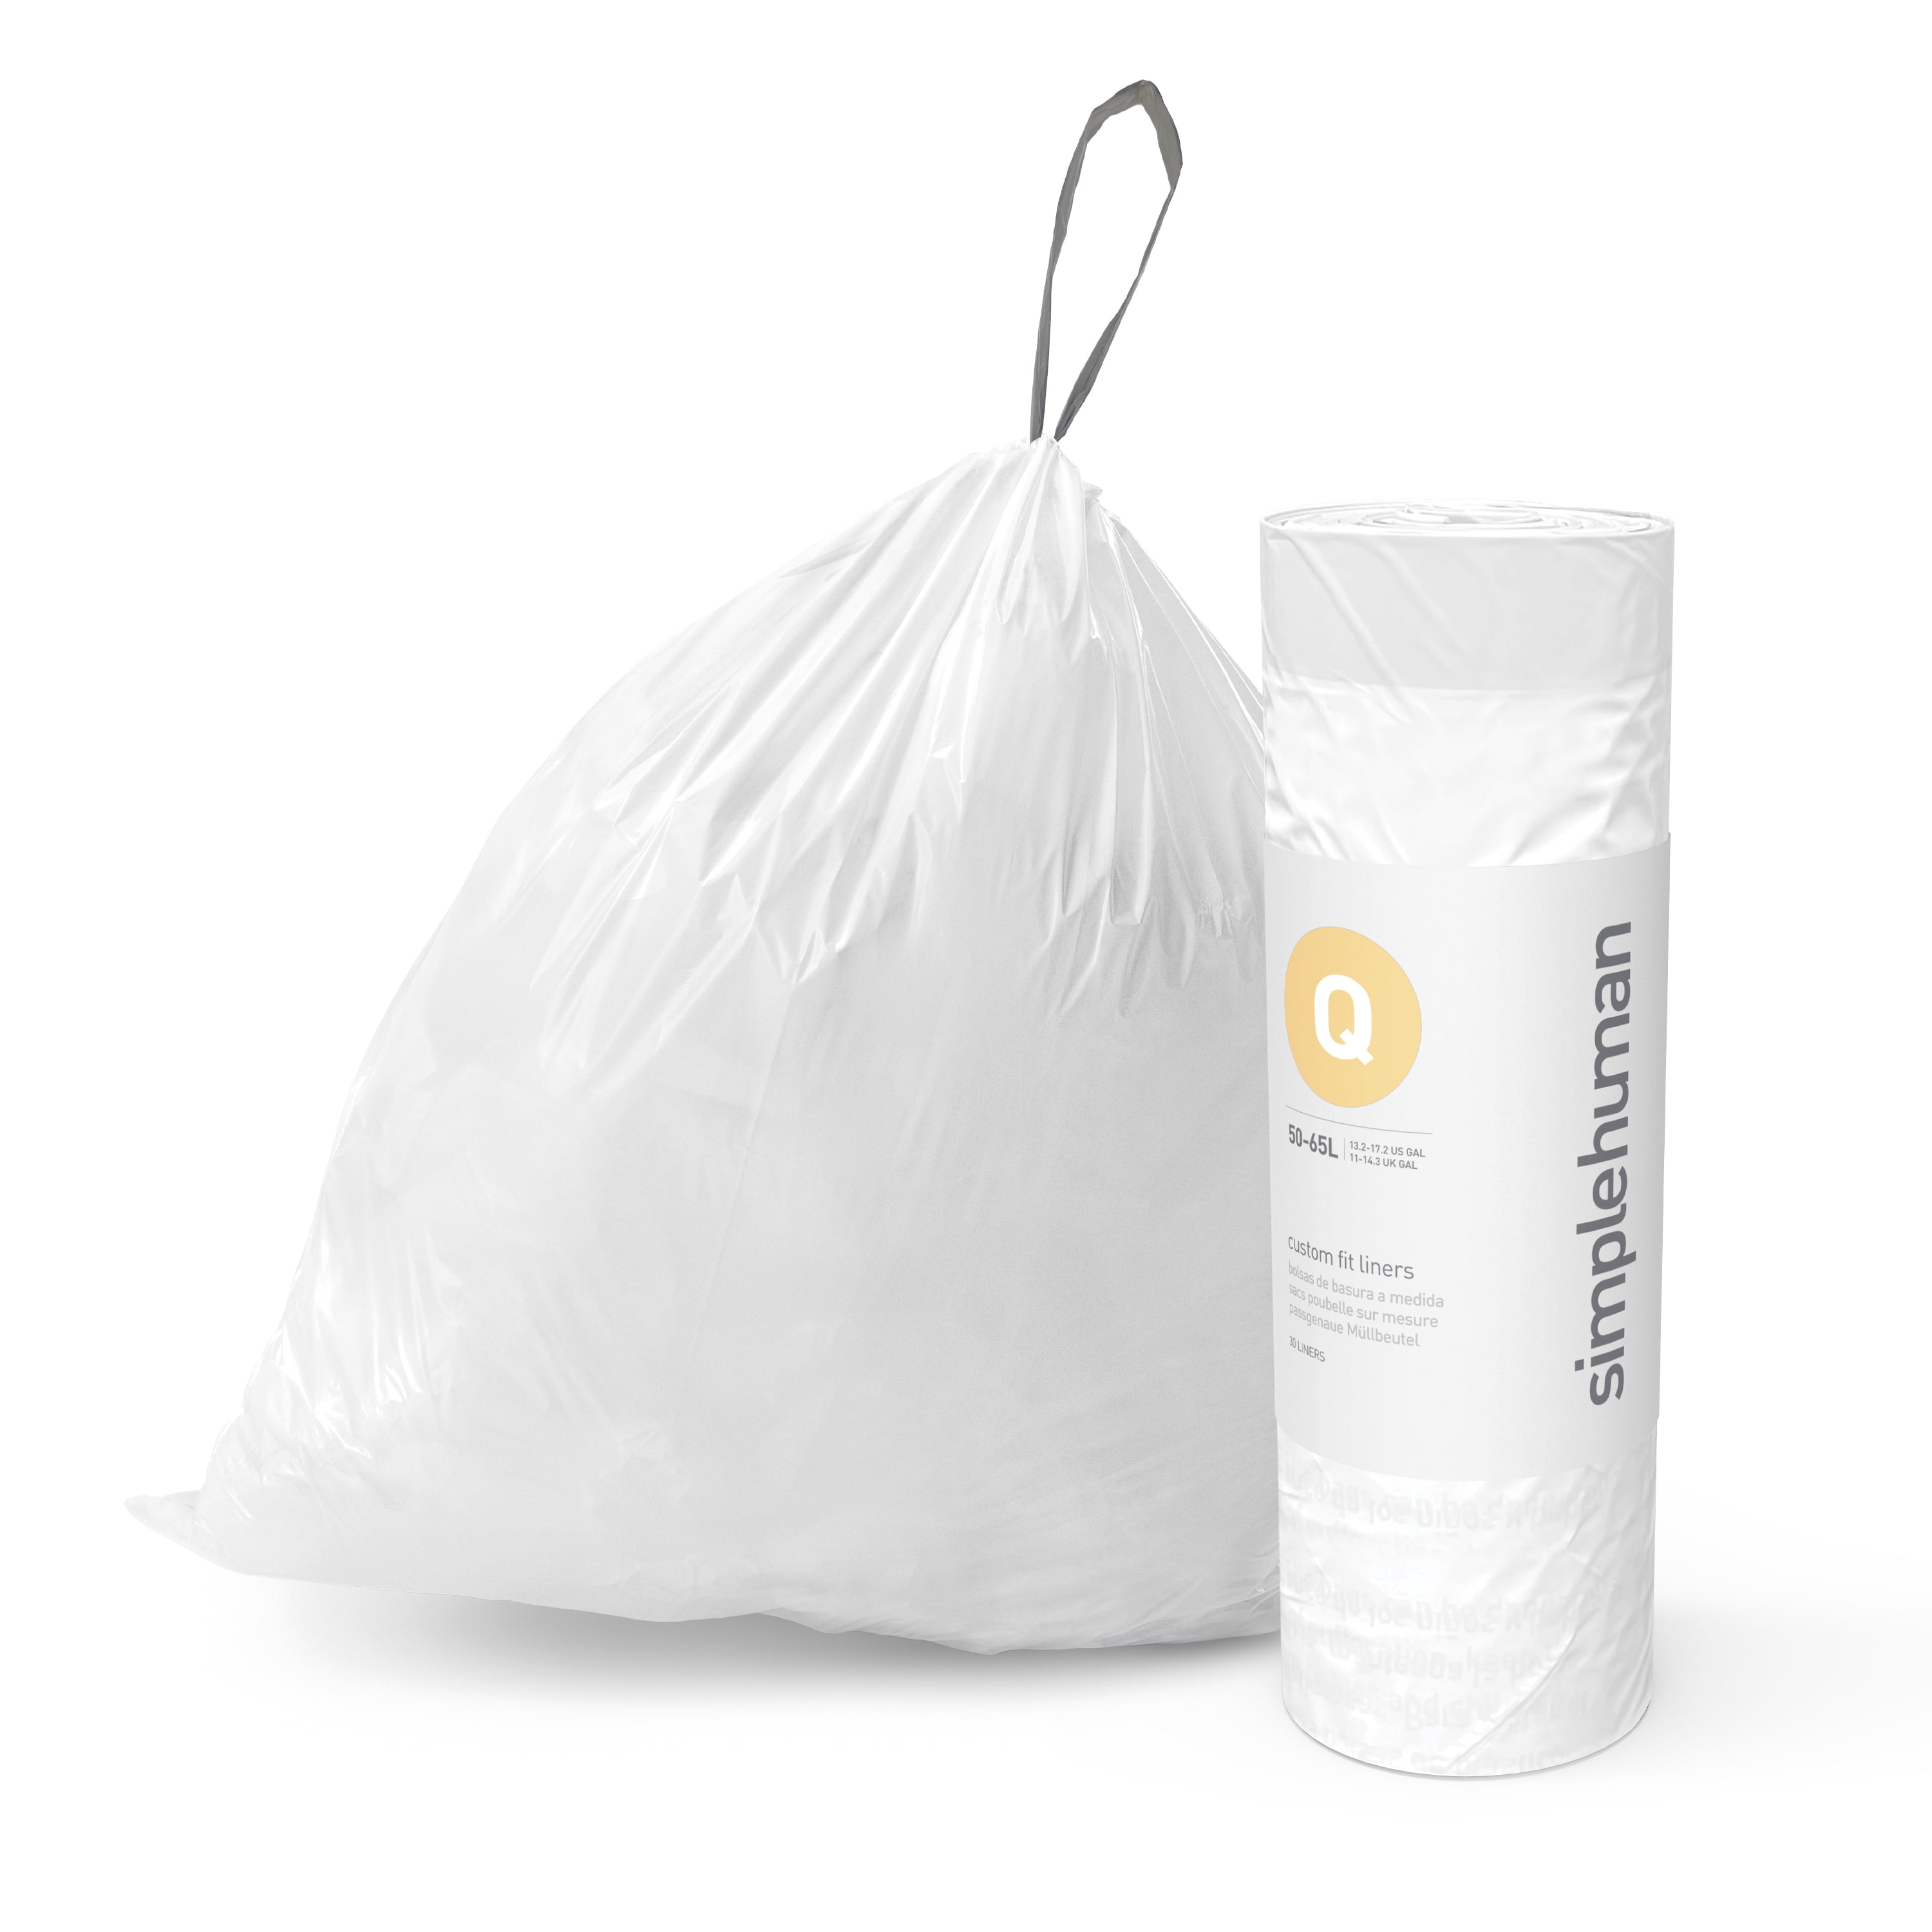 DisplayForever Code Q (200 Count) 13-17 Gallon Heavy Duty Drawstring  Plastic Trash Bags Compatible with simplehuman Code Q,1.2 Mil,White  Drawstring